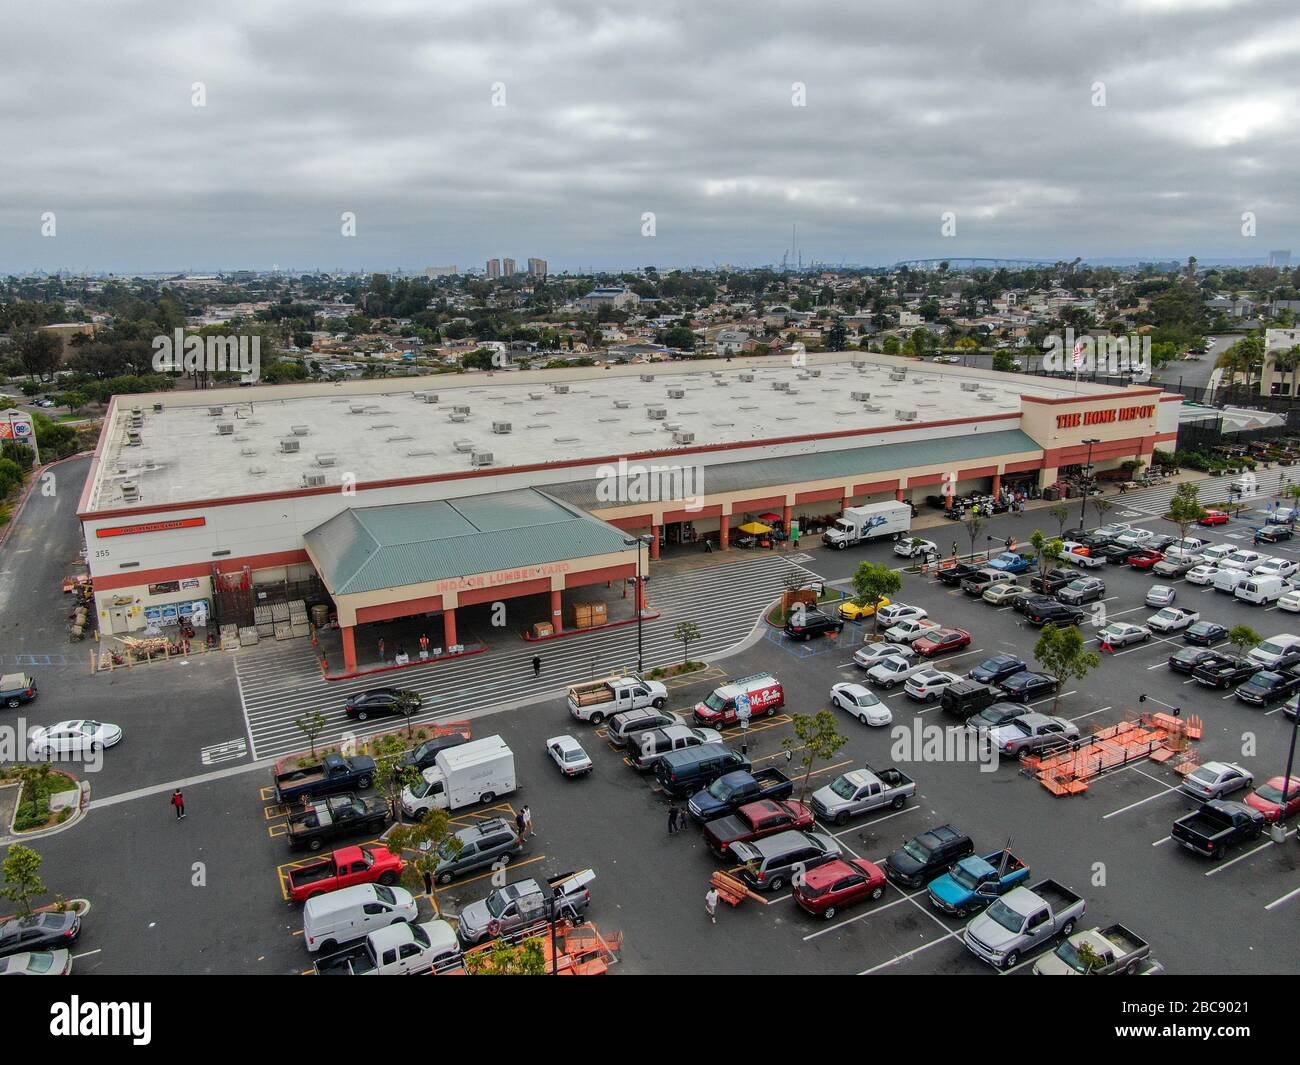 Aerial view of The Home Depot store and parking lot in San Diego